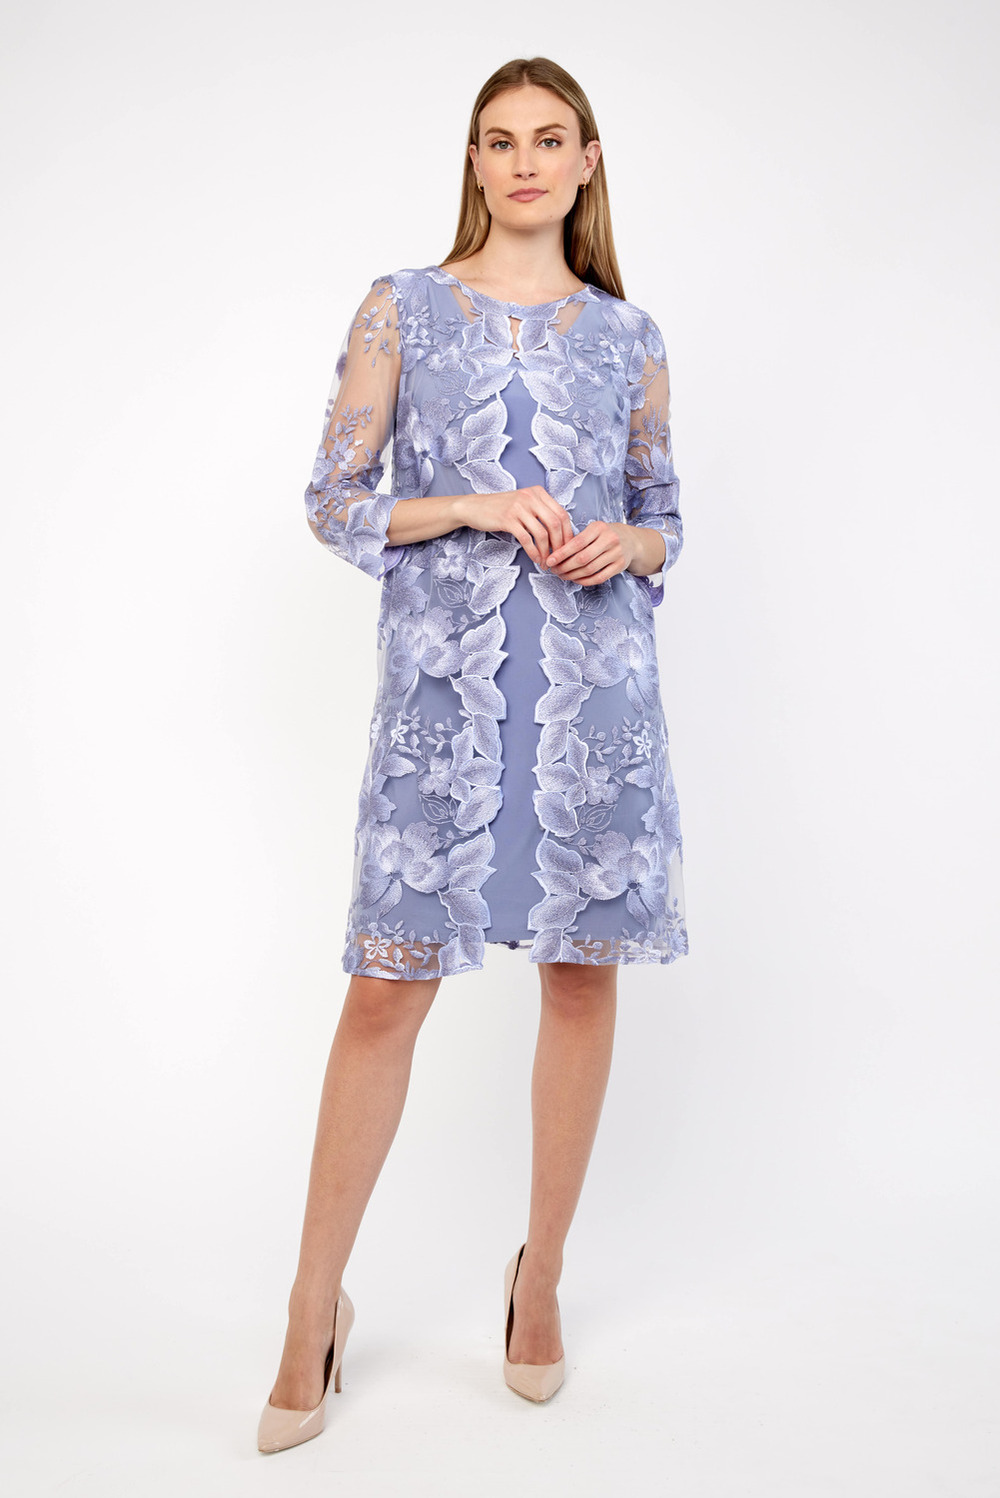 Embroidered Lace Jacket with Jersey Dress Style 81122202. Lavender 